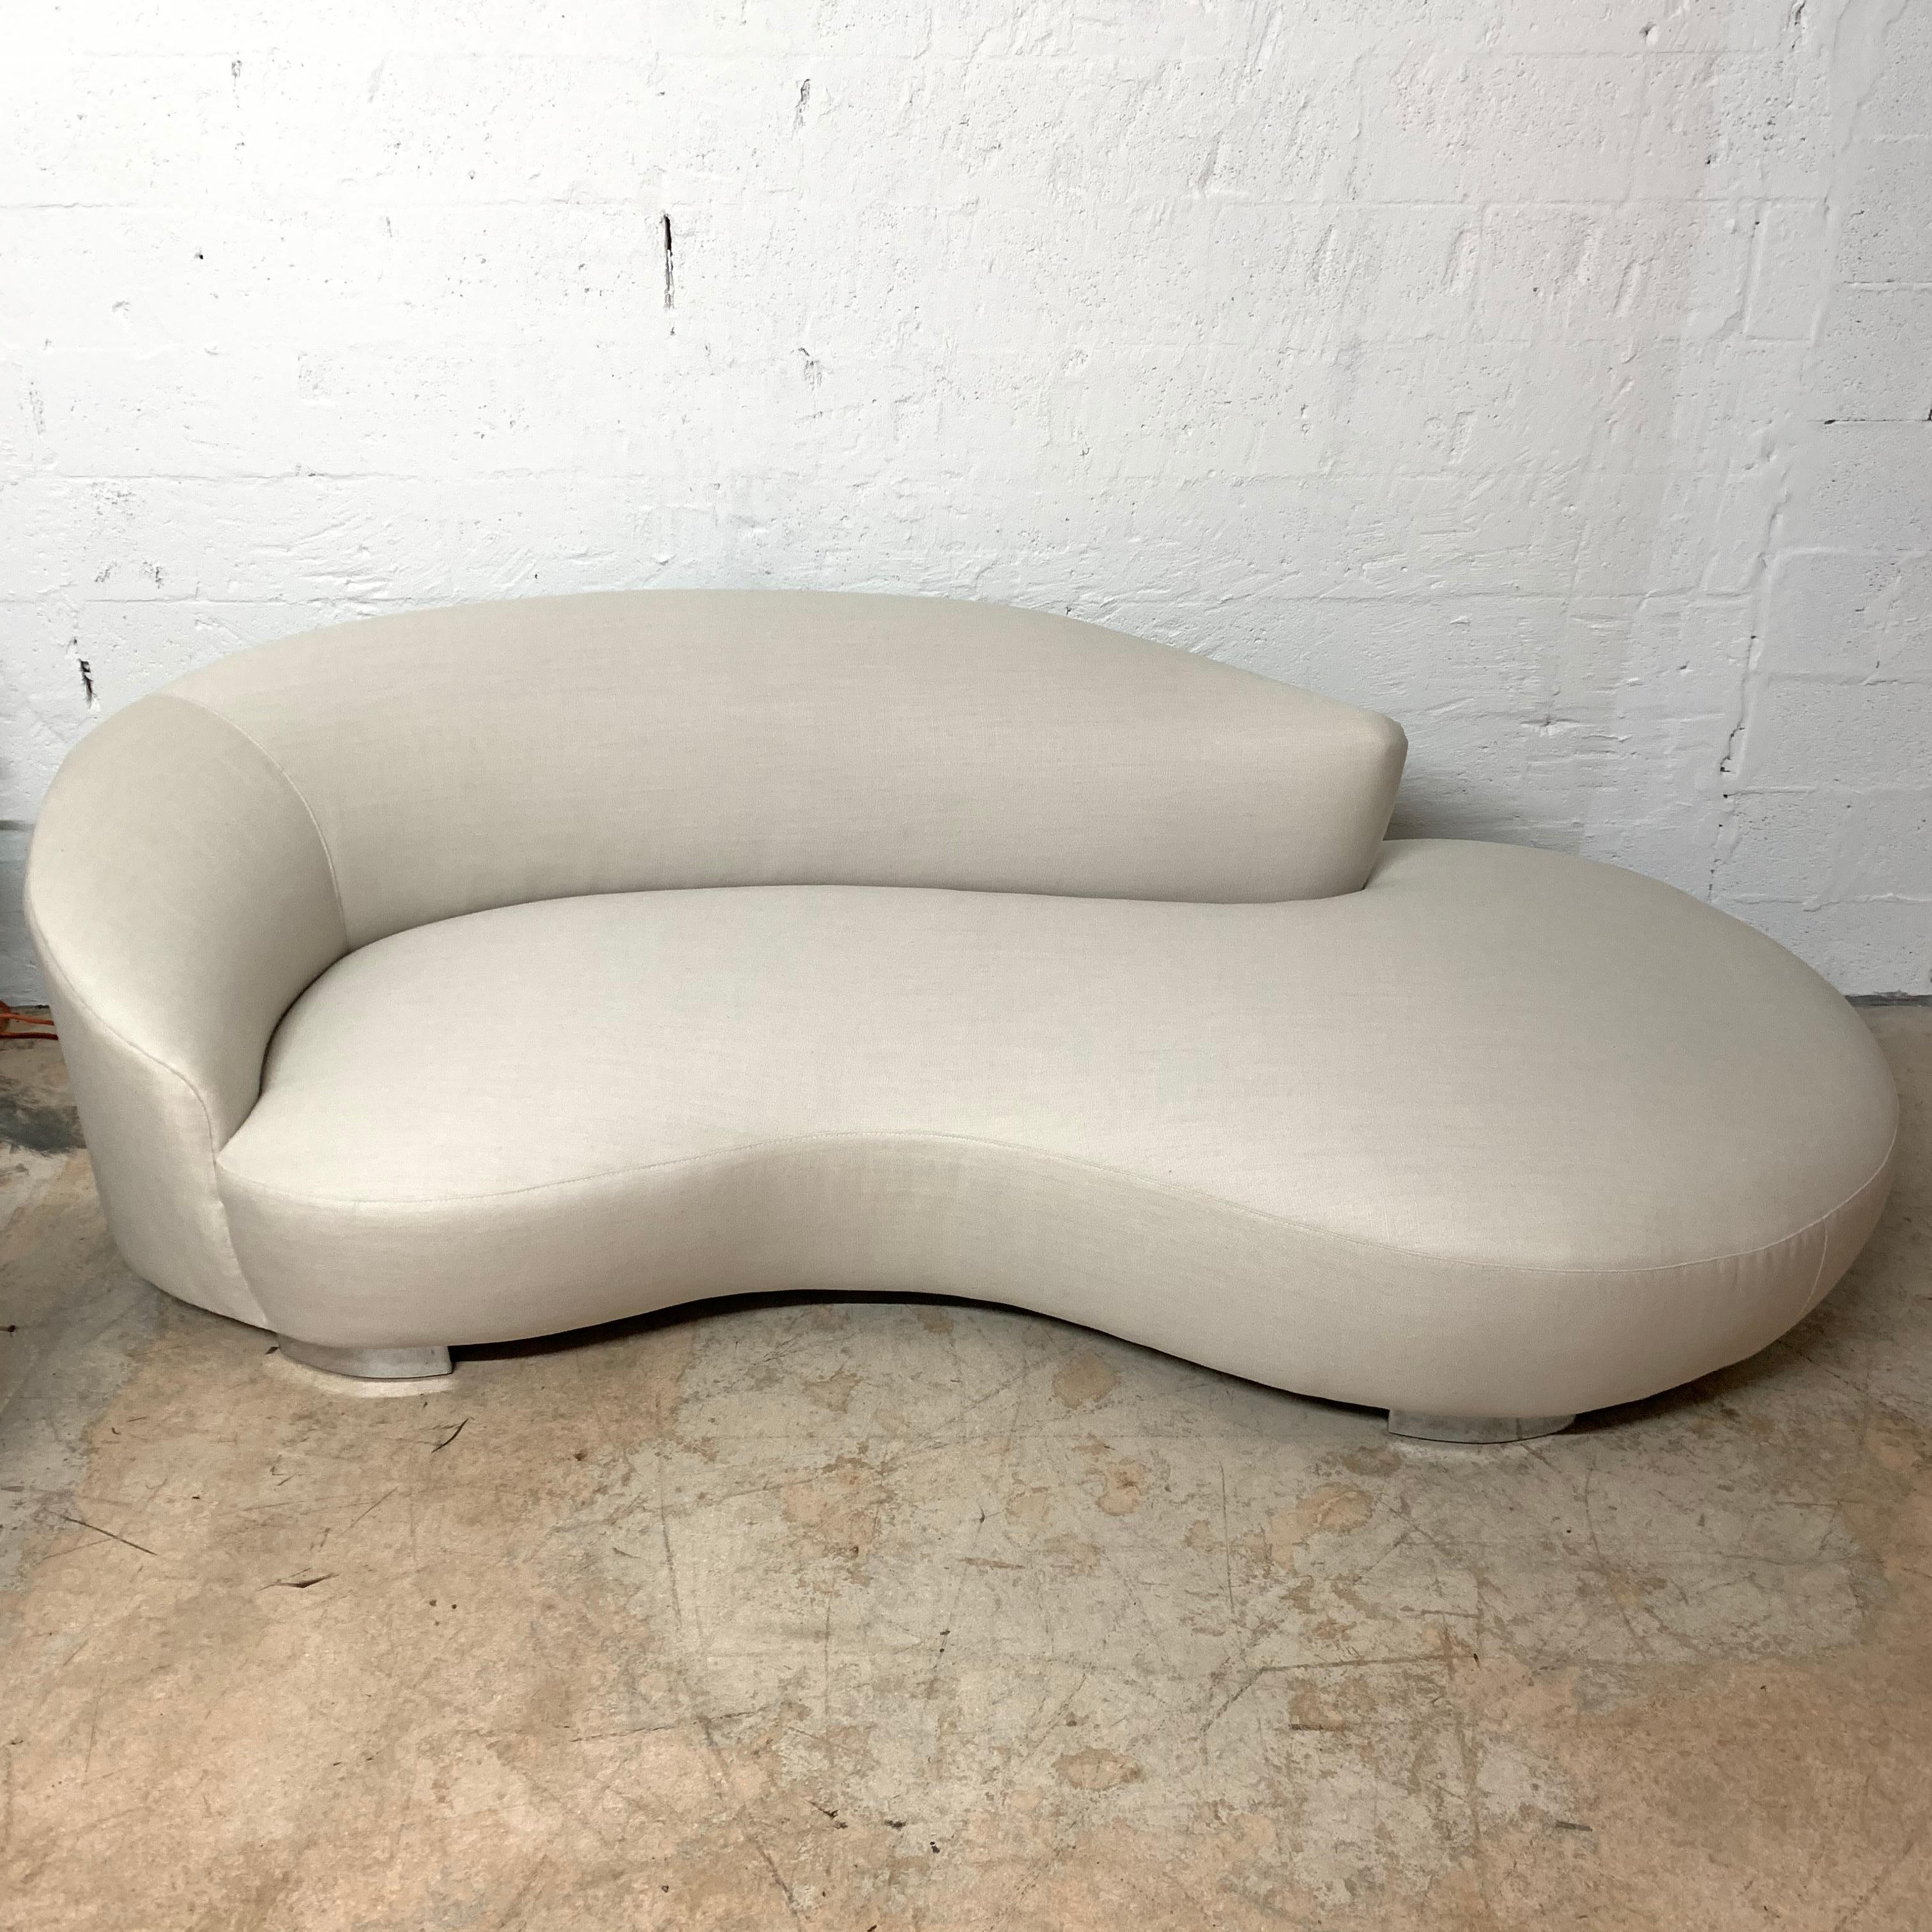 Post-modern sculptural serpentine cloud chaise lounge sofa rendered in grey beige oyster linen with chrome-plated steel feet, USA, 1980s.